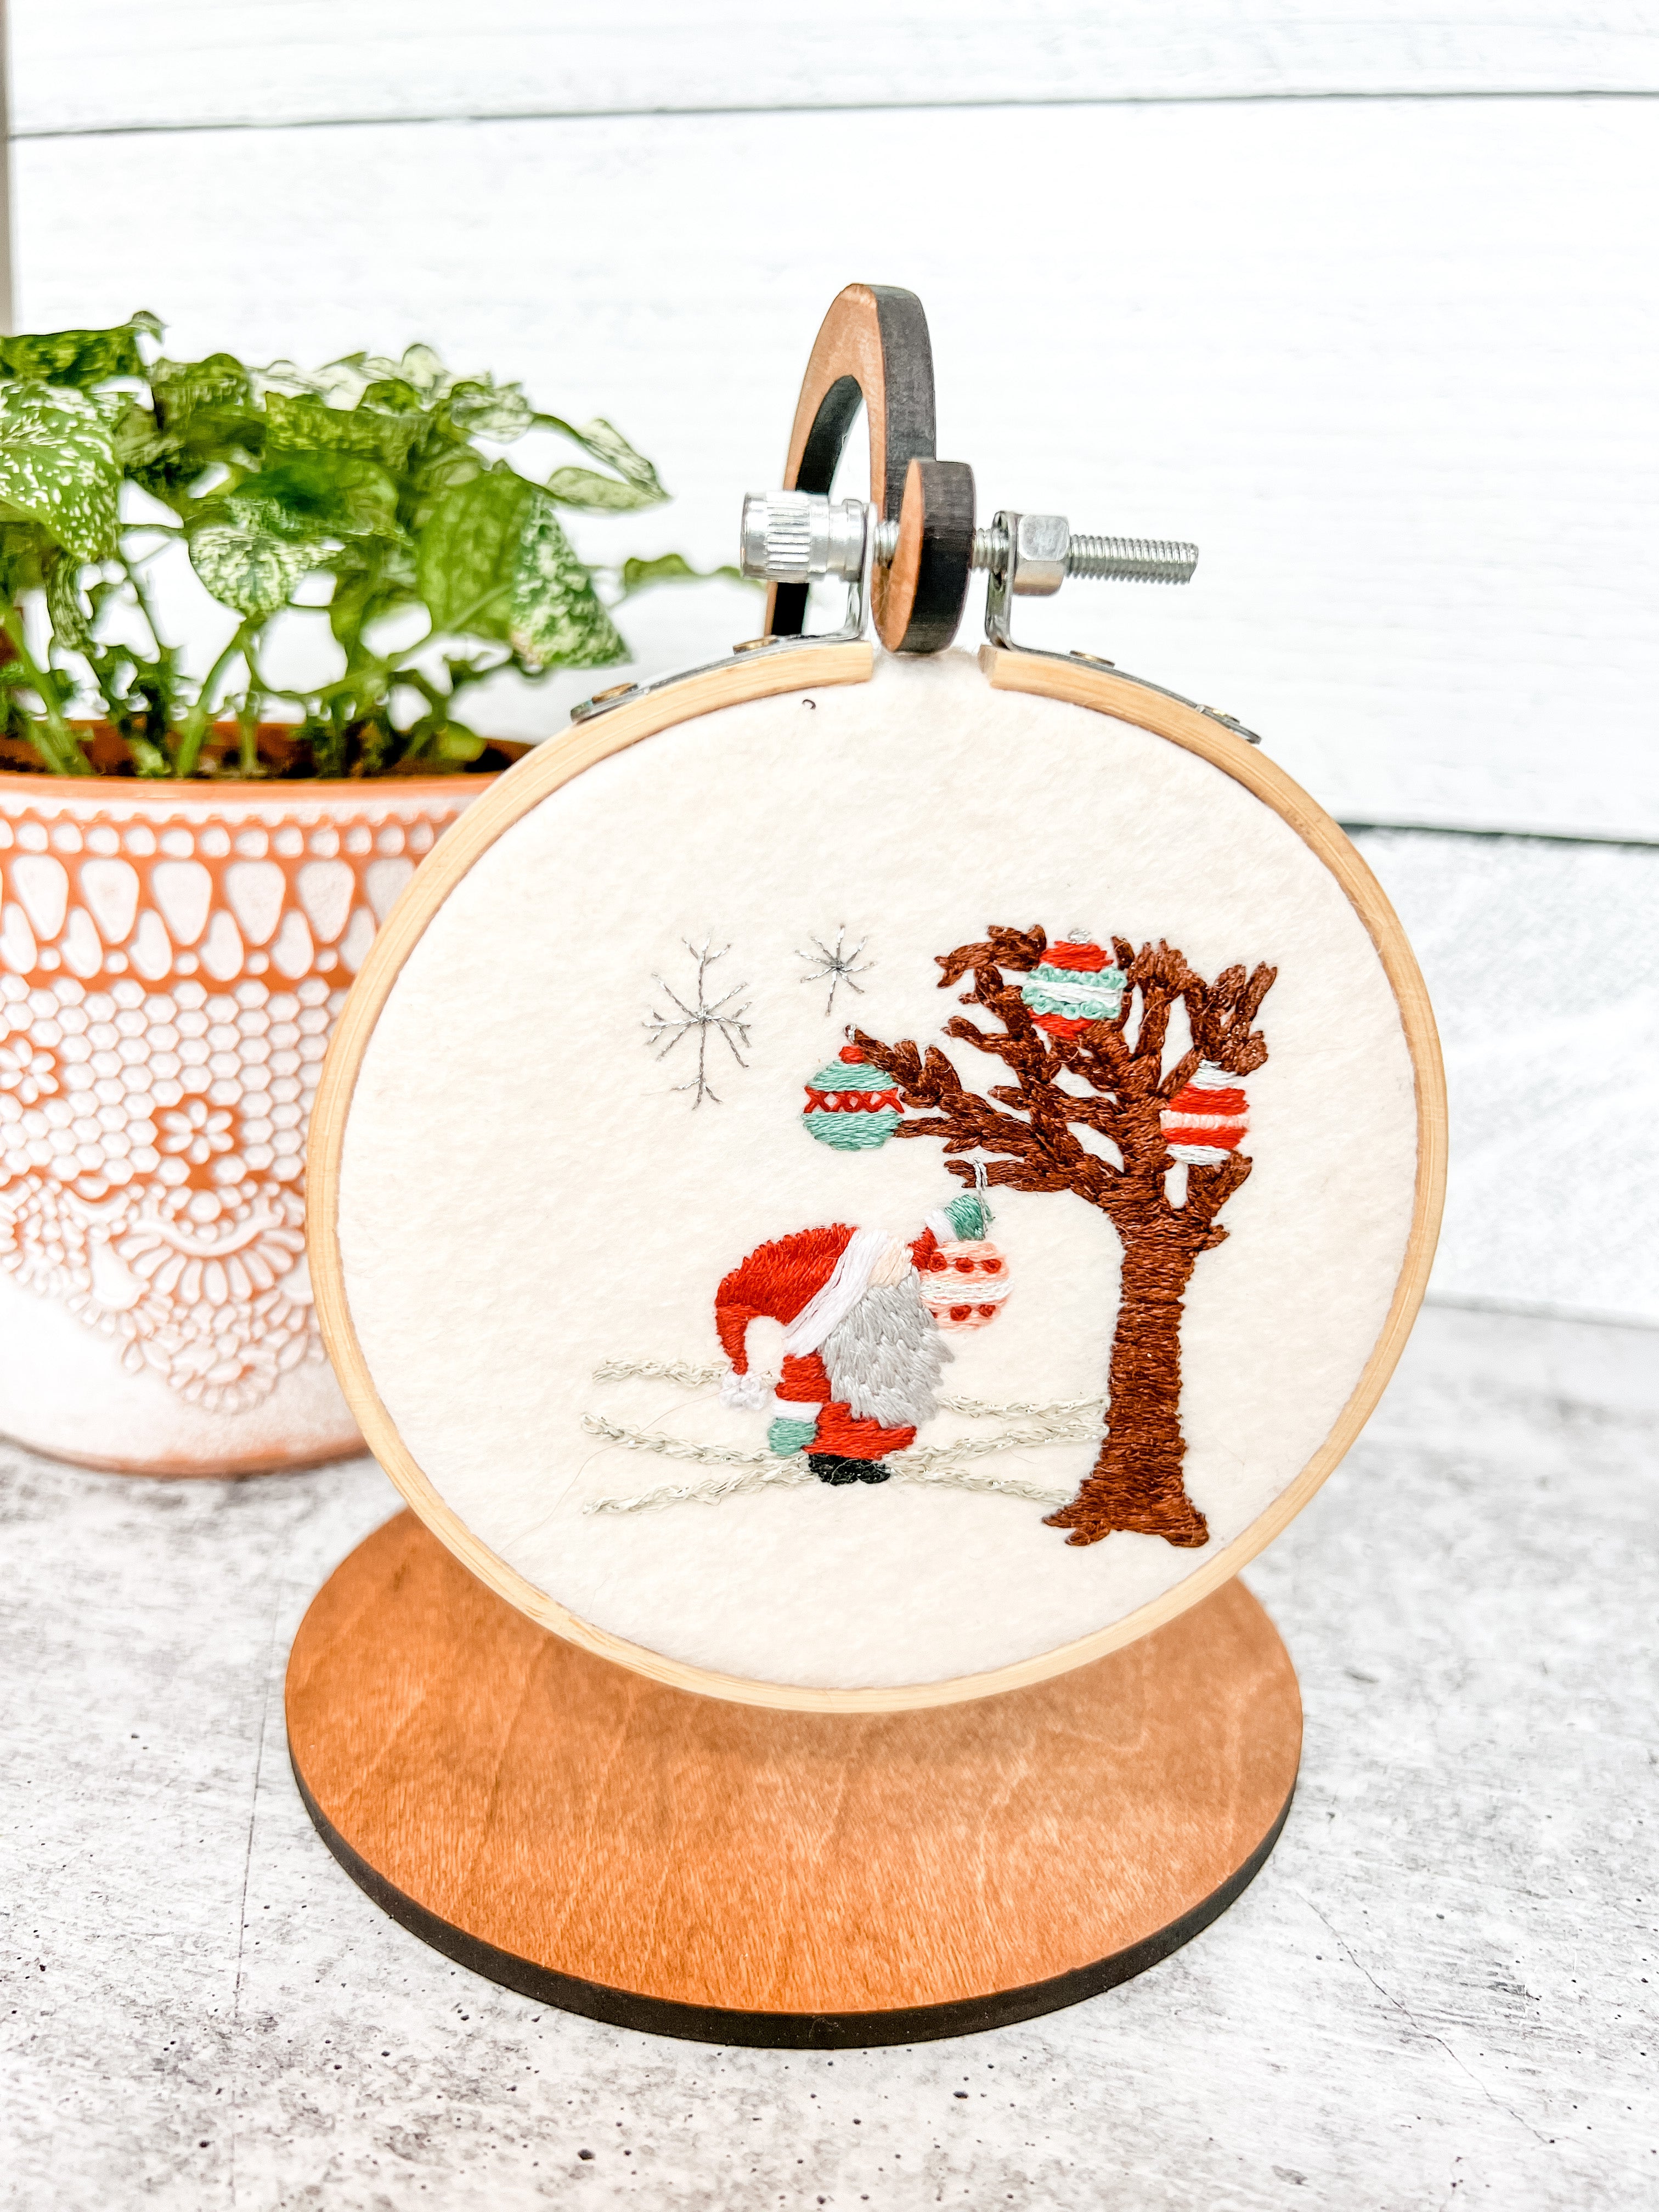 Embroidery Display Hoop Holders - The little Green Bean